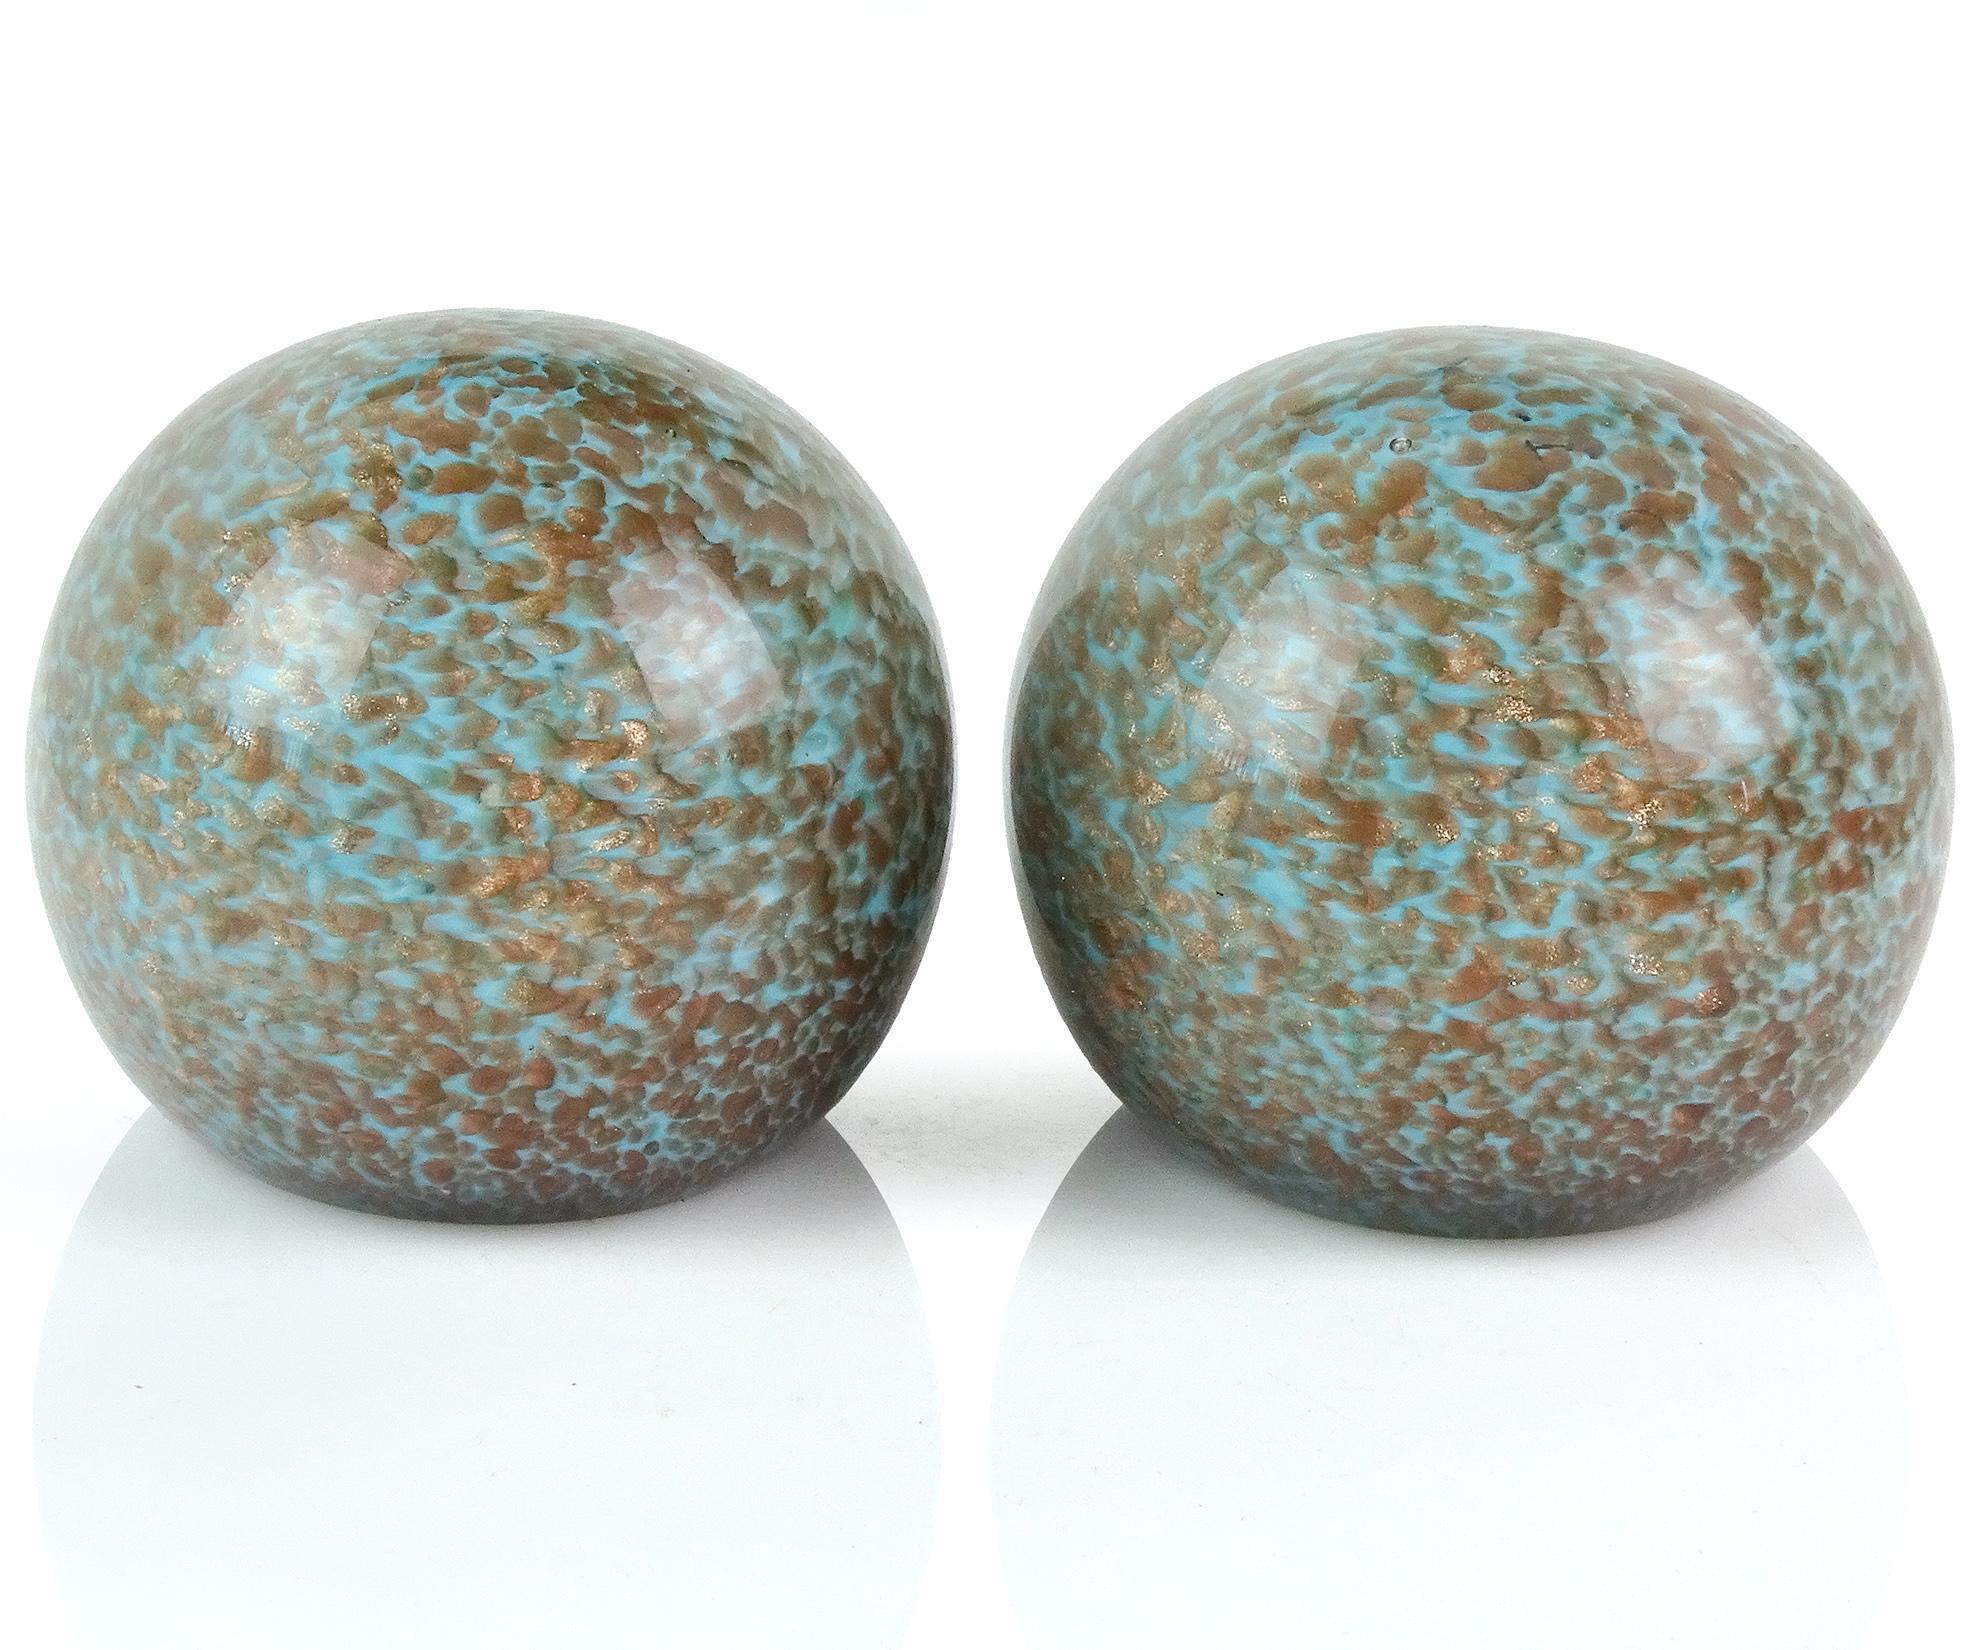 Beautiful vintage Murano hand blown light blue with copper aventurine flecks Italian art glass bookends. Attributed to the Fratelli Toso company. They are polished on two sides, looking like geode rocks. The copper spots glitter all around them.